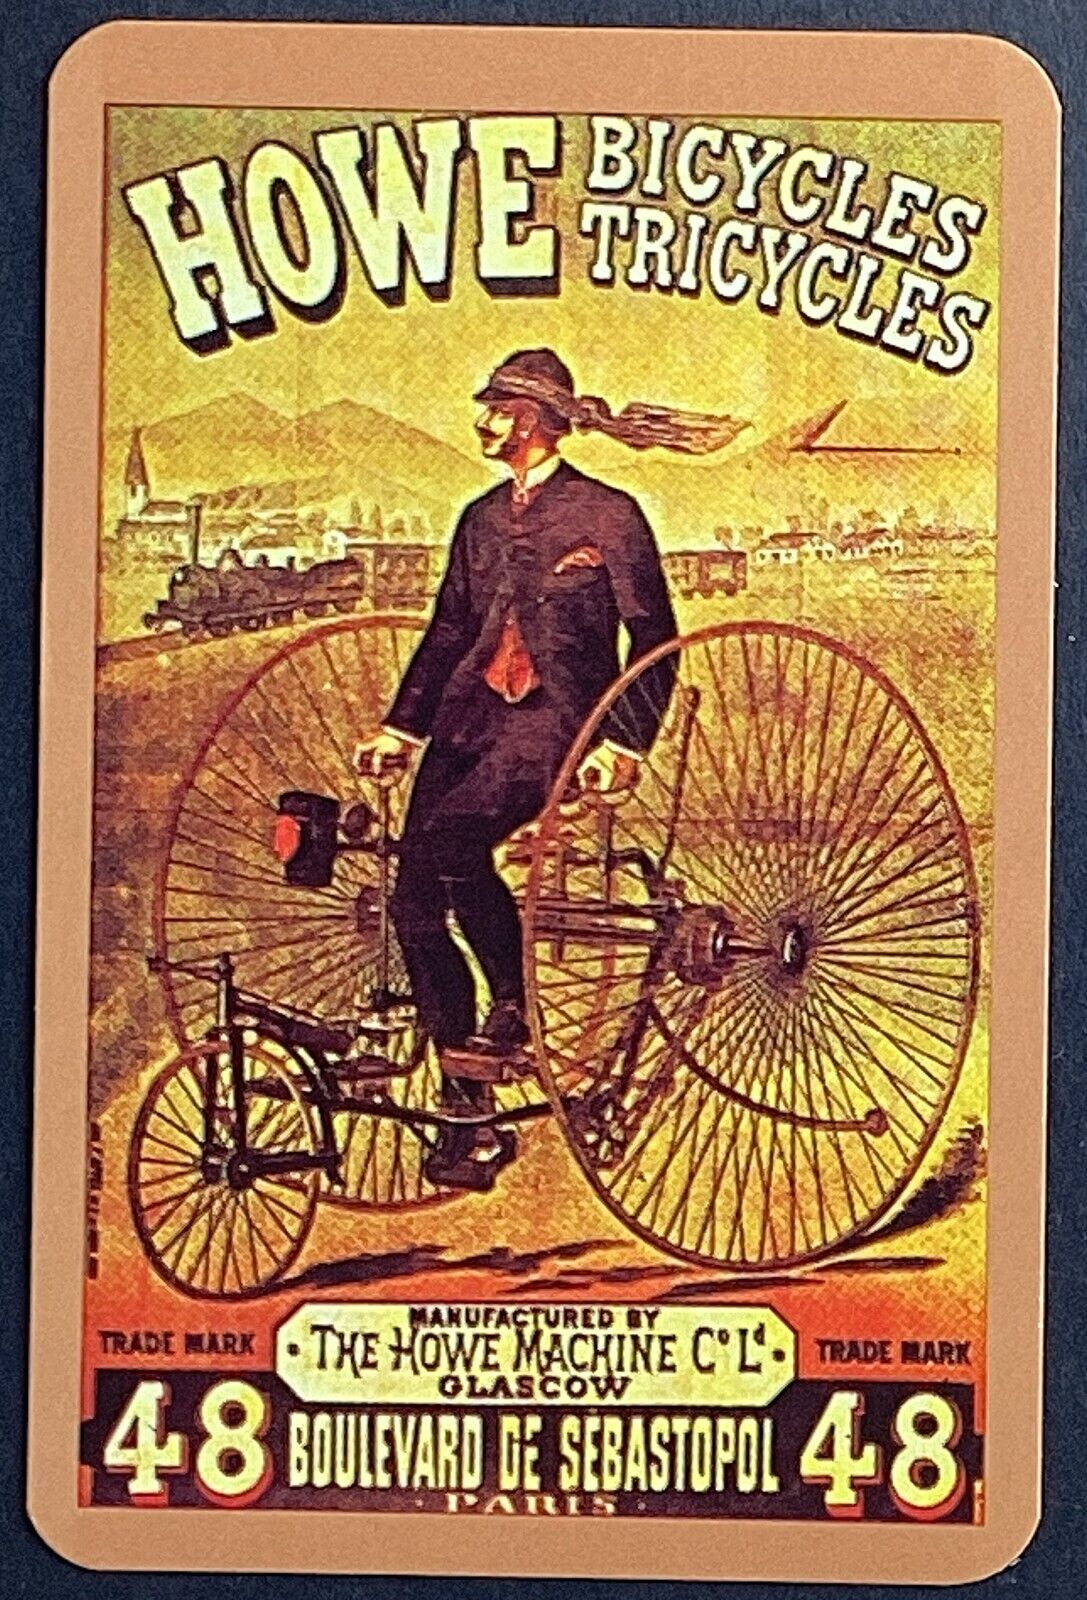 Howe Bicycles Tricycles Ad Single Swap Playing Card King Spades